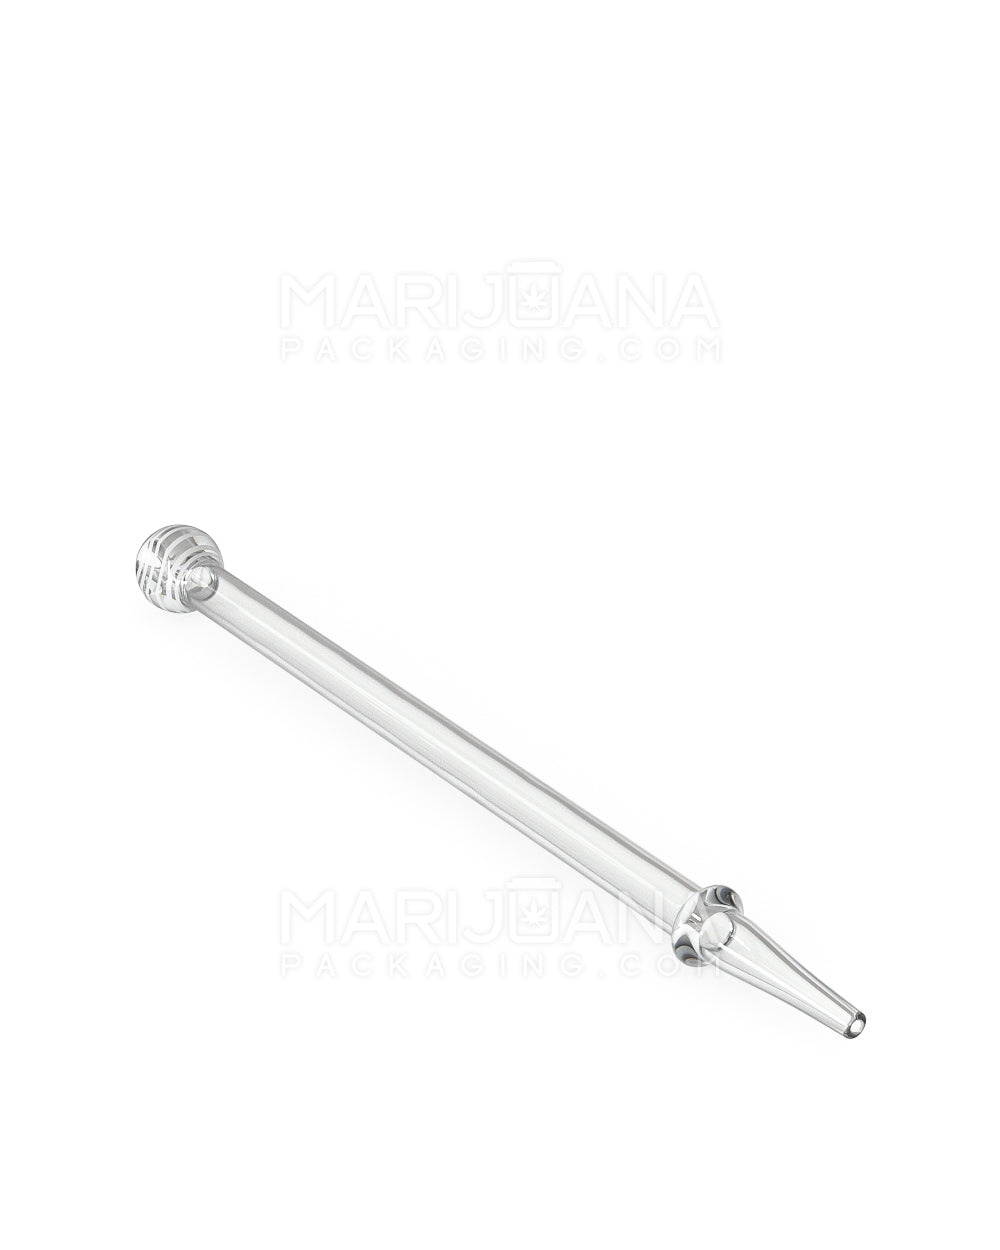 Assorted Mouthpiece Ringed Dab Straw | 6.5in Long - Glass - Clear - 7